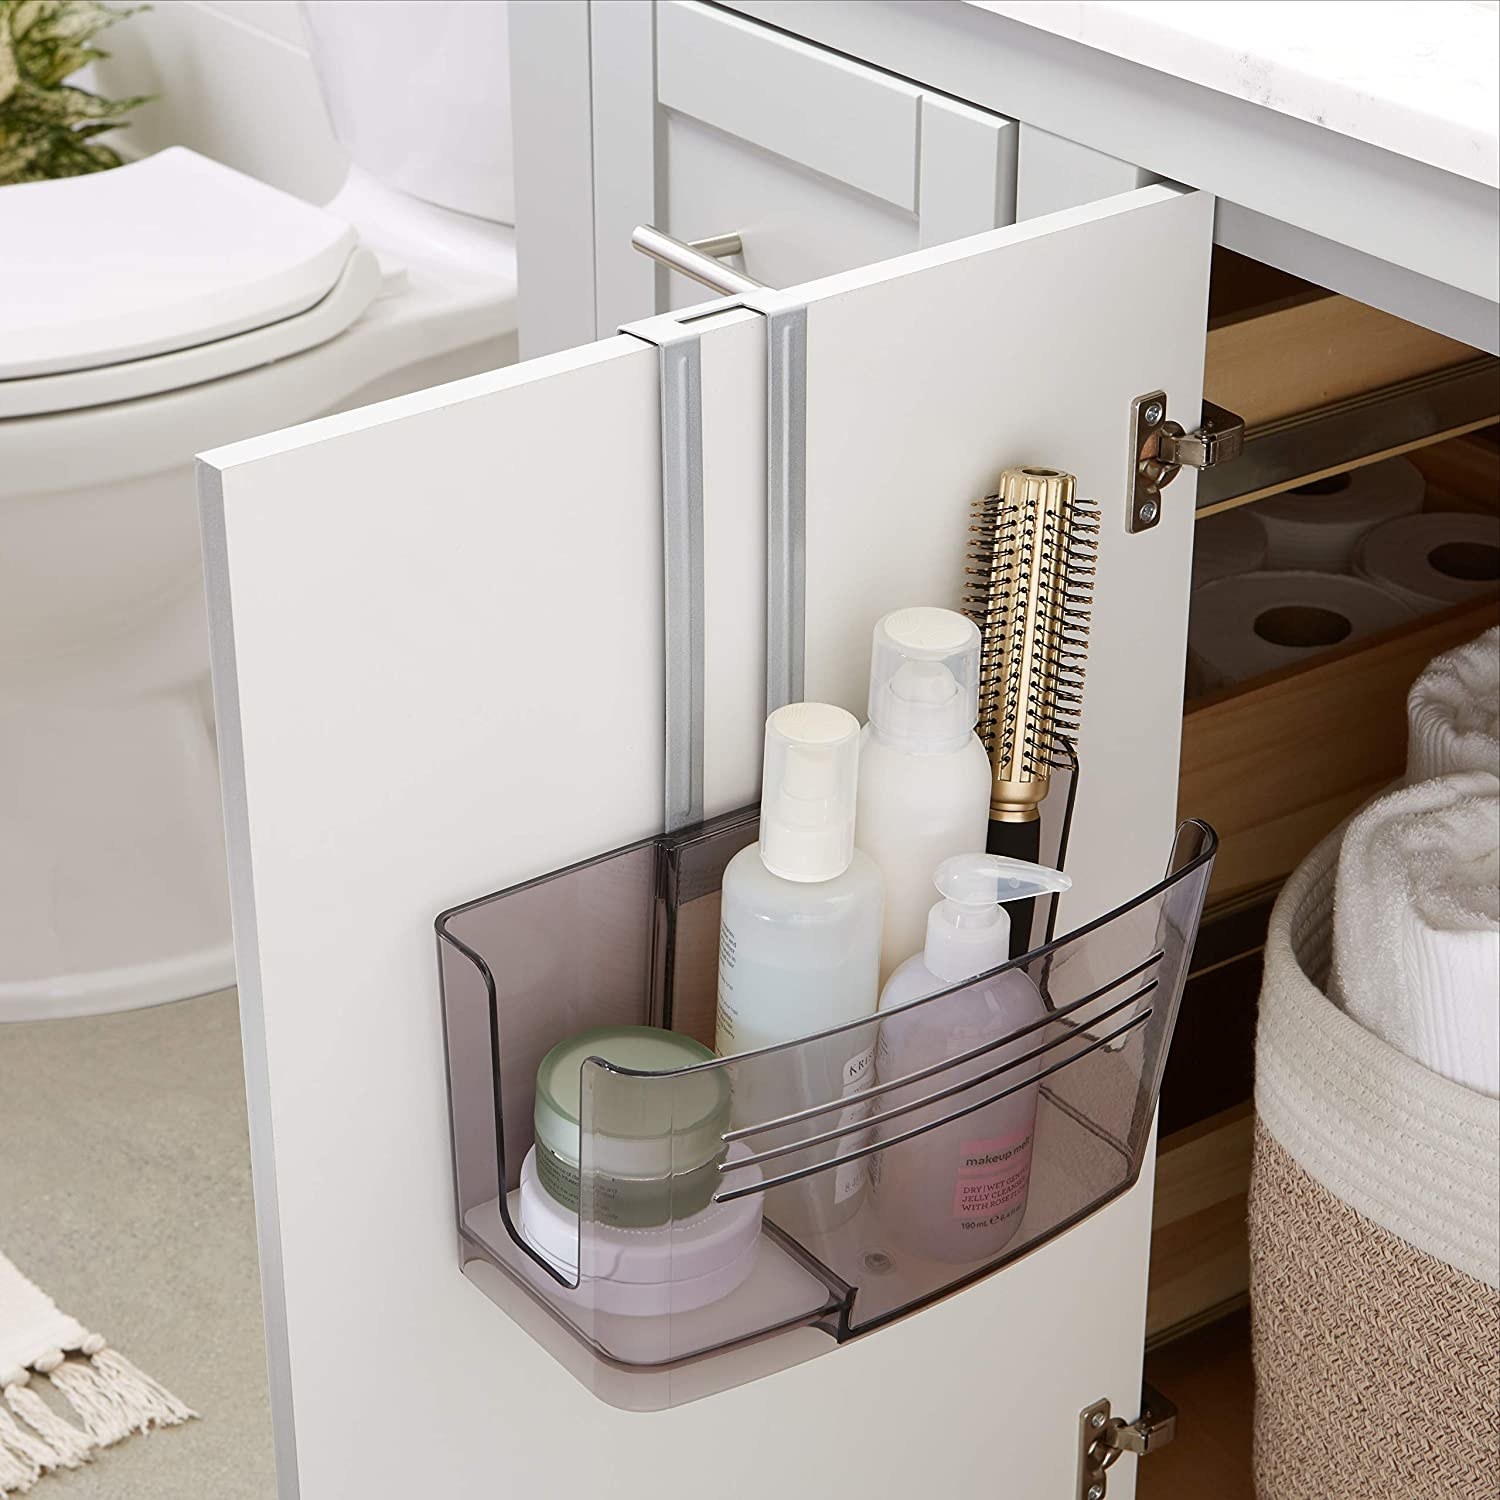 An open bathroom cabinet with the organizer on the door filled with beauty products